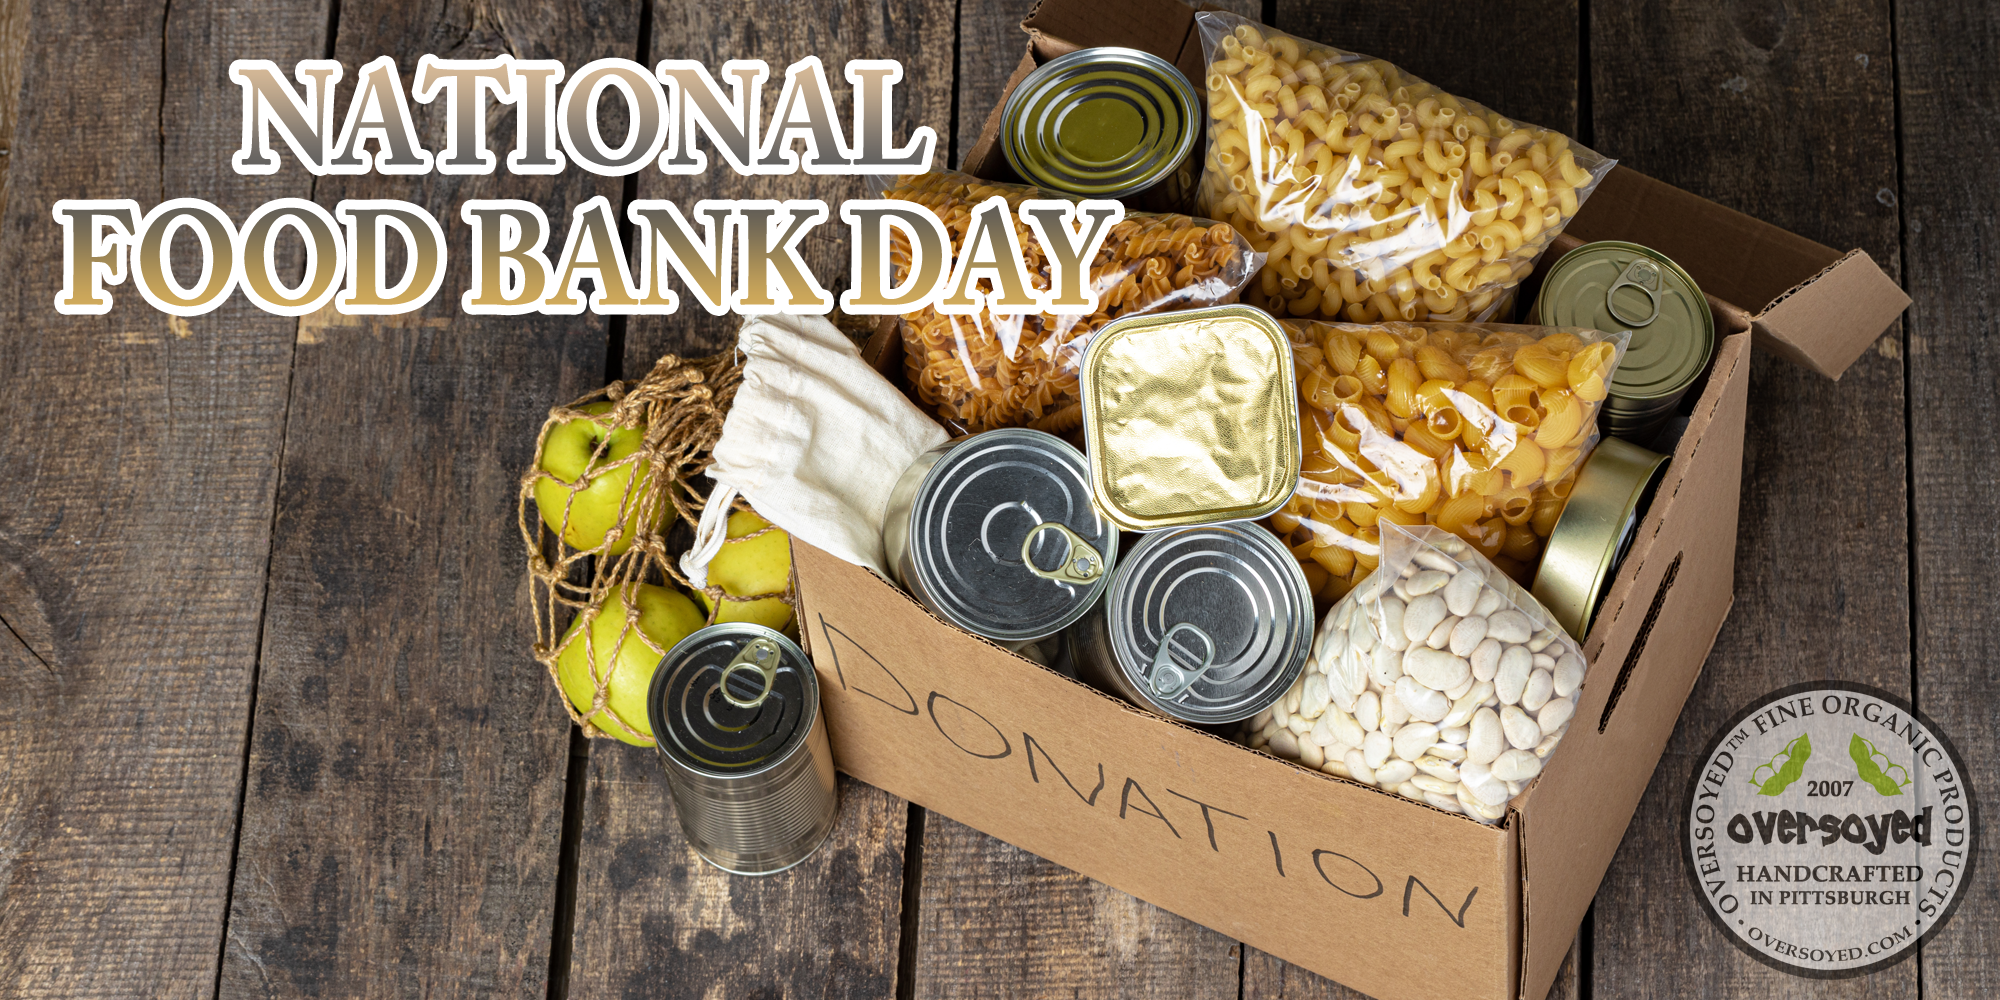 OverSoyed Fine Organic Products - National Food Bank Day